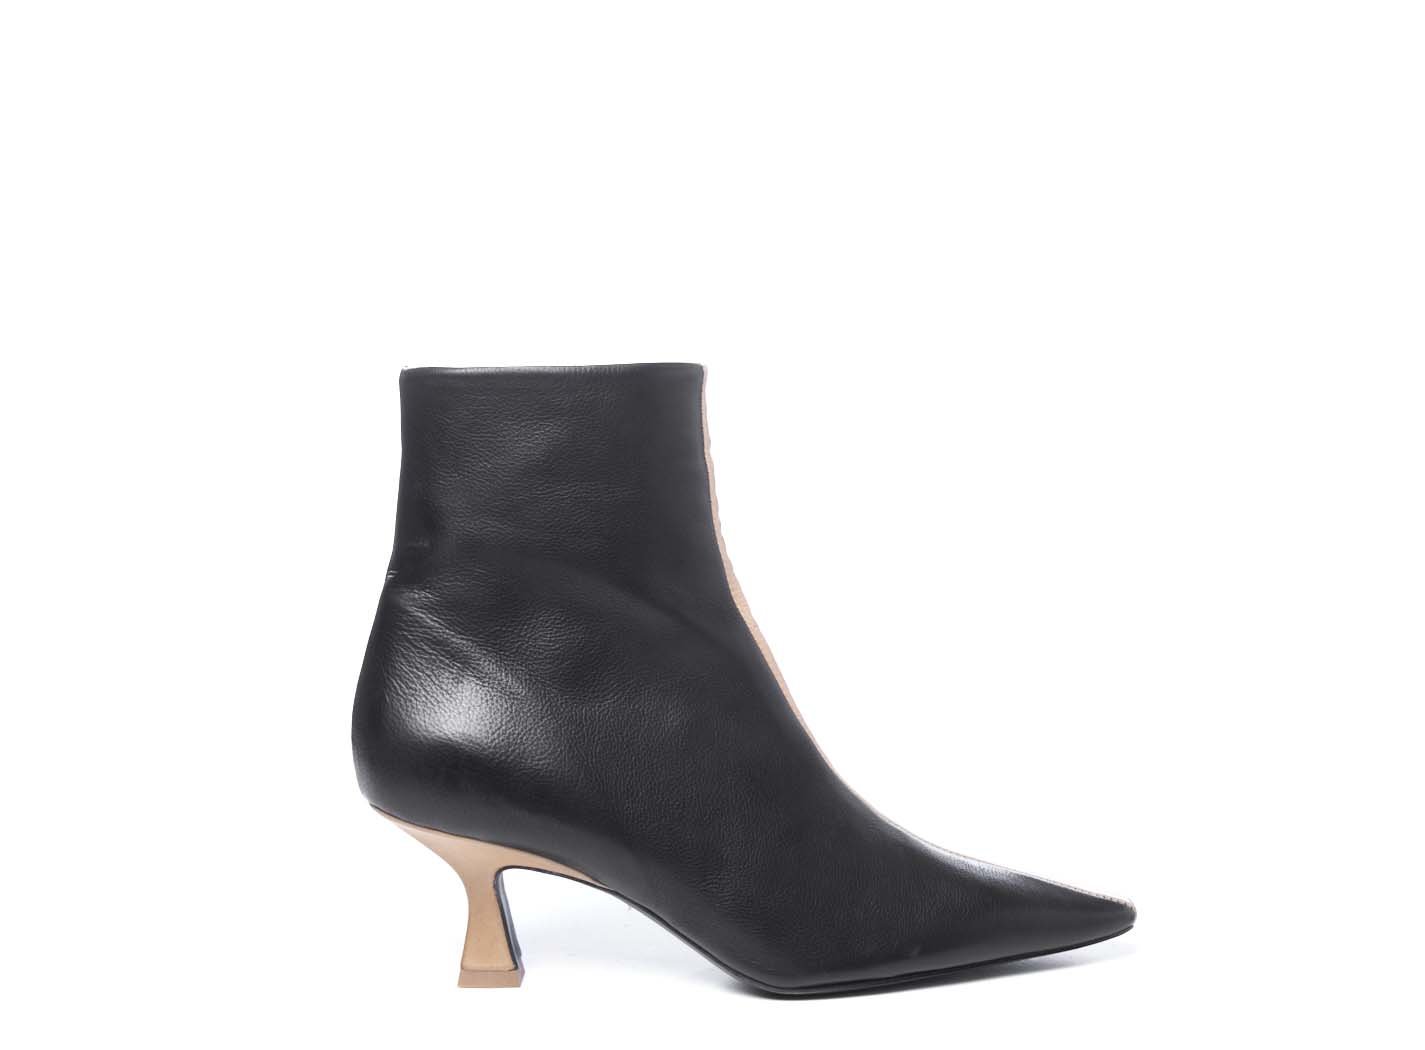 Black/sand-yellow ankle boots in soft 